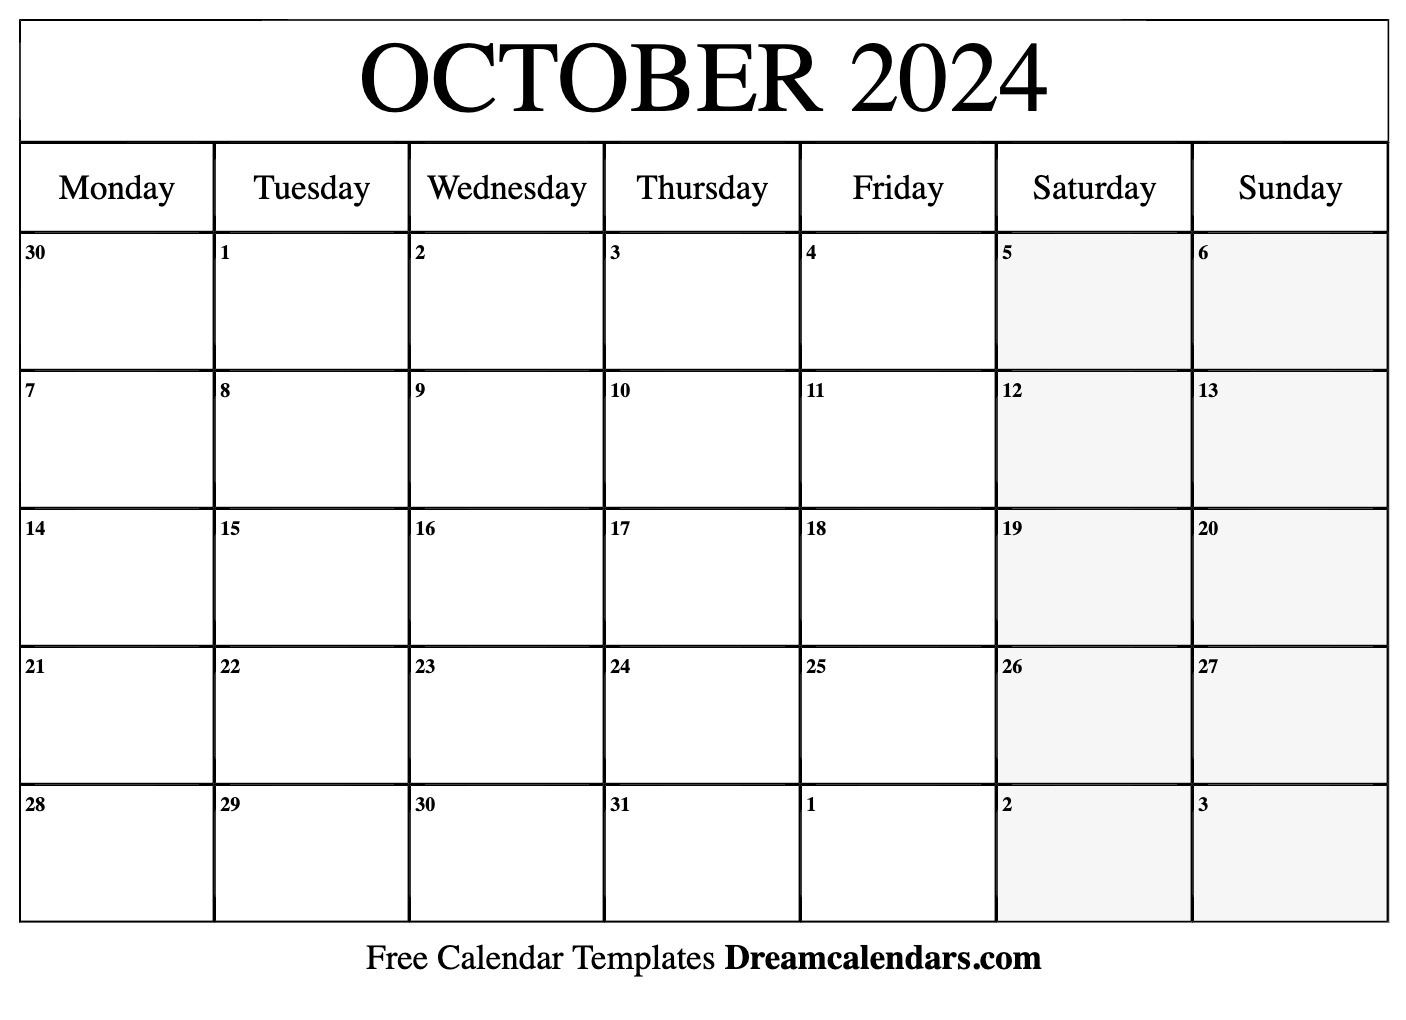 October 2024 Calendar | Free Blank Printable With Holidays inside Free Printable Calendar 2024 October And November